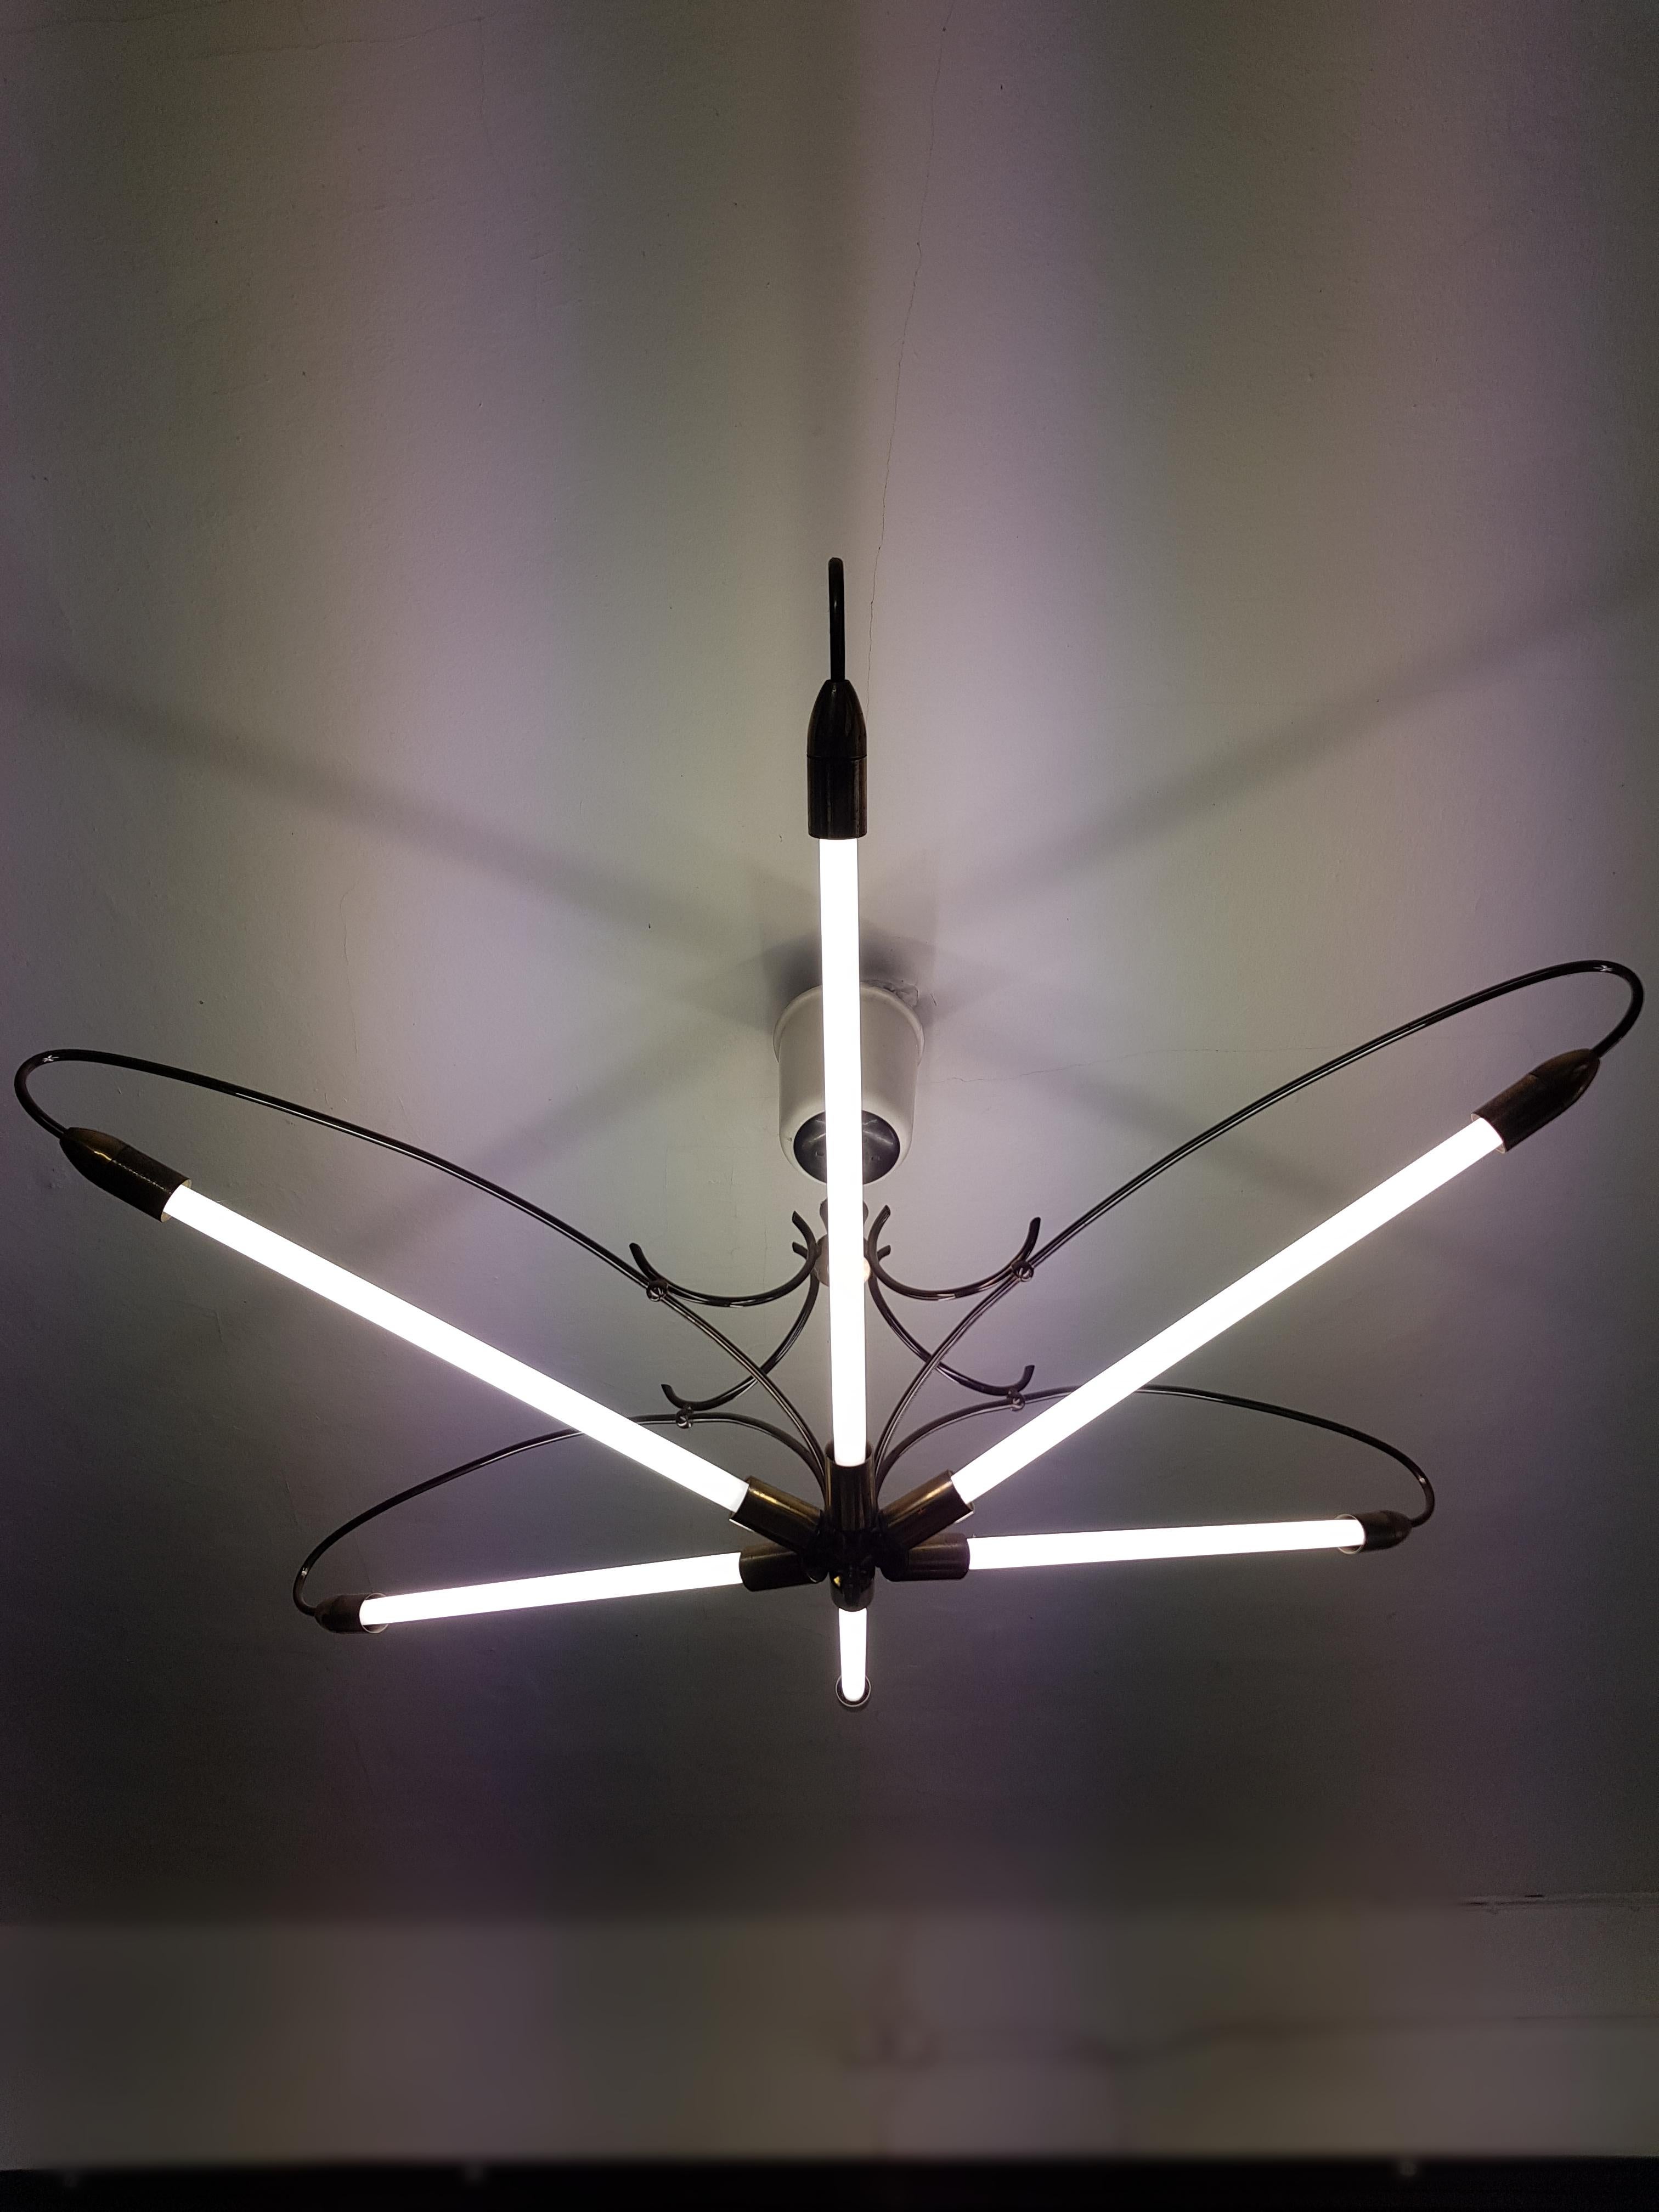 
Measures: Total height 75 cm, height without chain 75 cm, diameter 155 cm, weight (approximately) 10 kg.

Number of lights: Five fluorescent tube lights

Large neon light tube Bauhaus pendant chandelier 1950s Vintage fluorescent lamp.